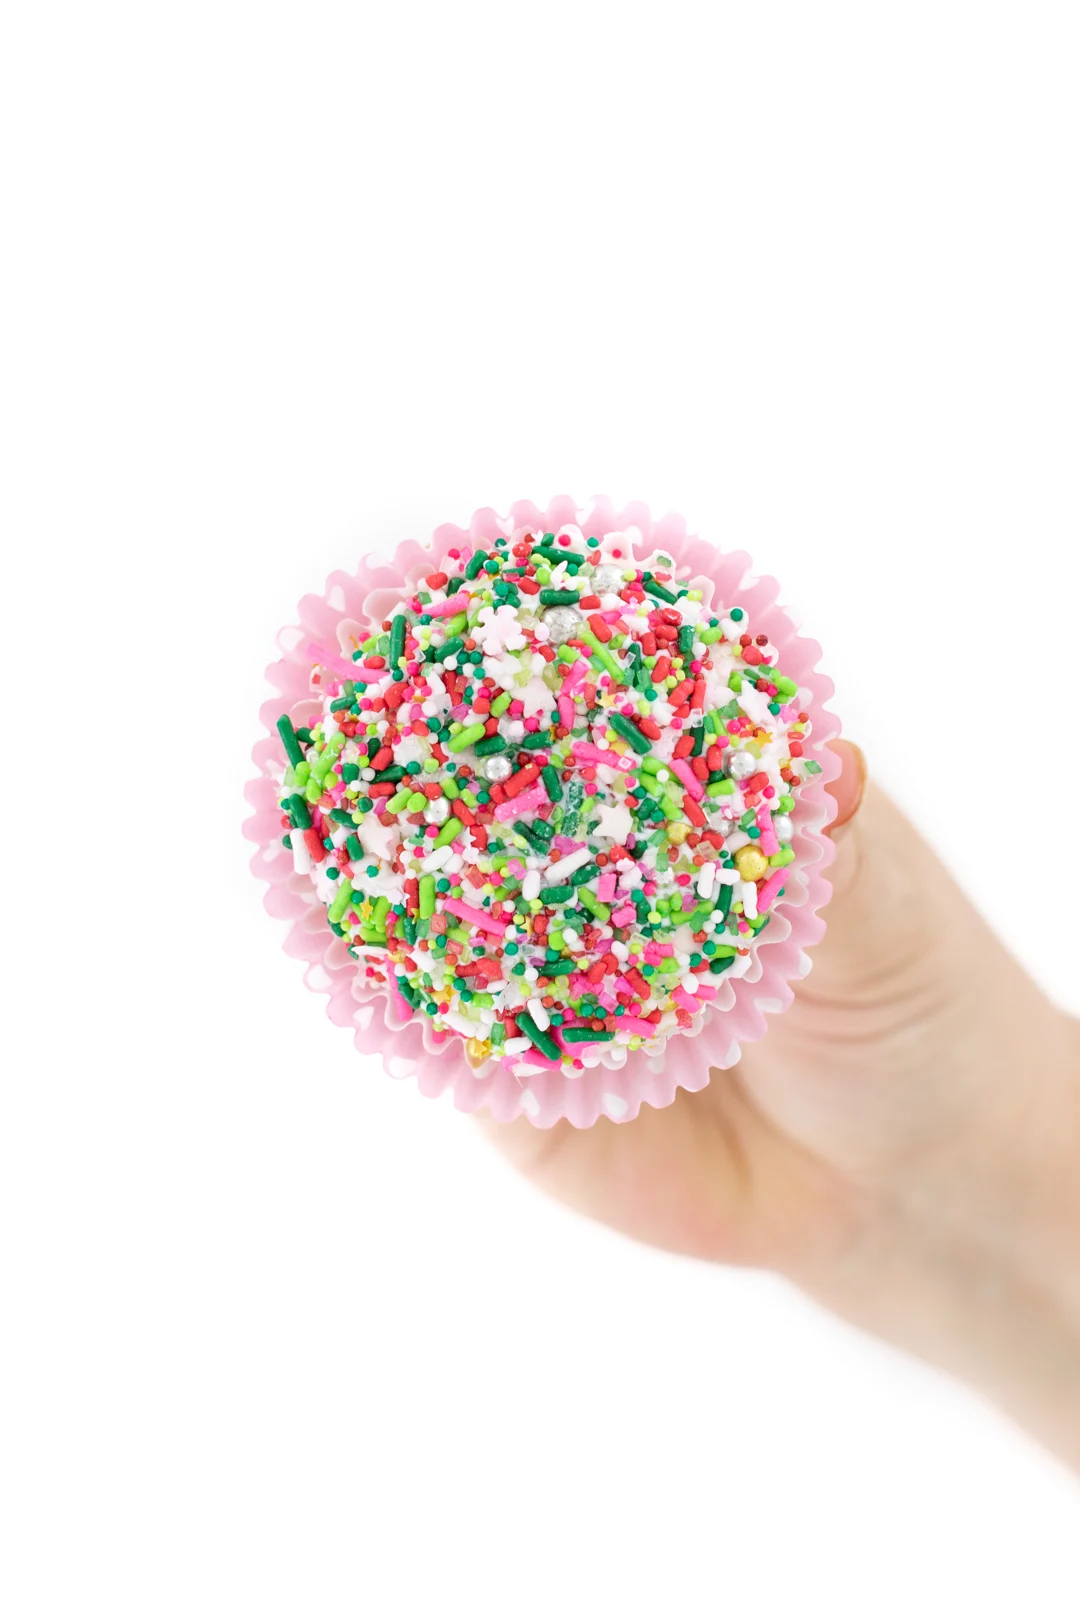 dipping frosted cupcakes into sprinkles to get them to stick